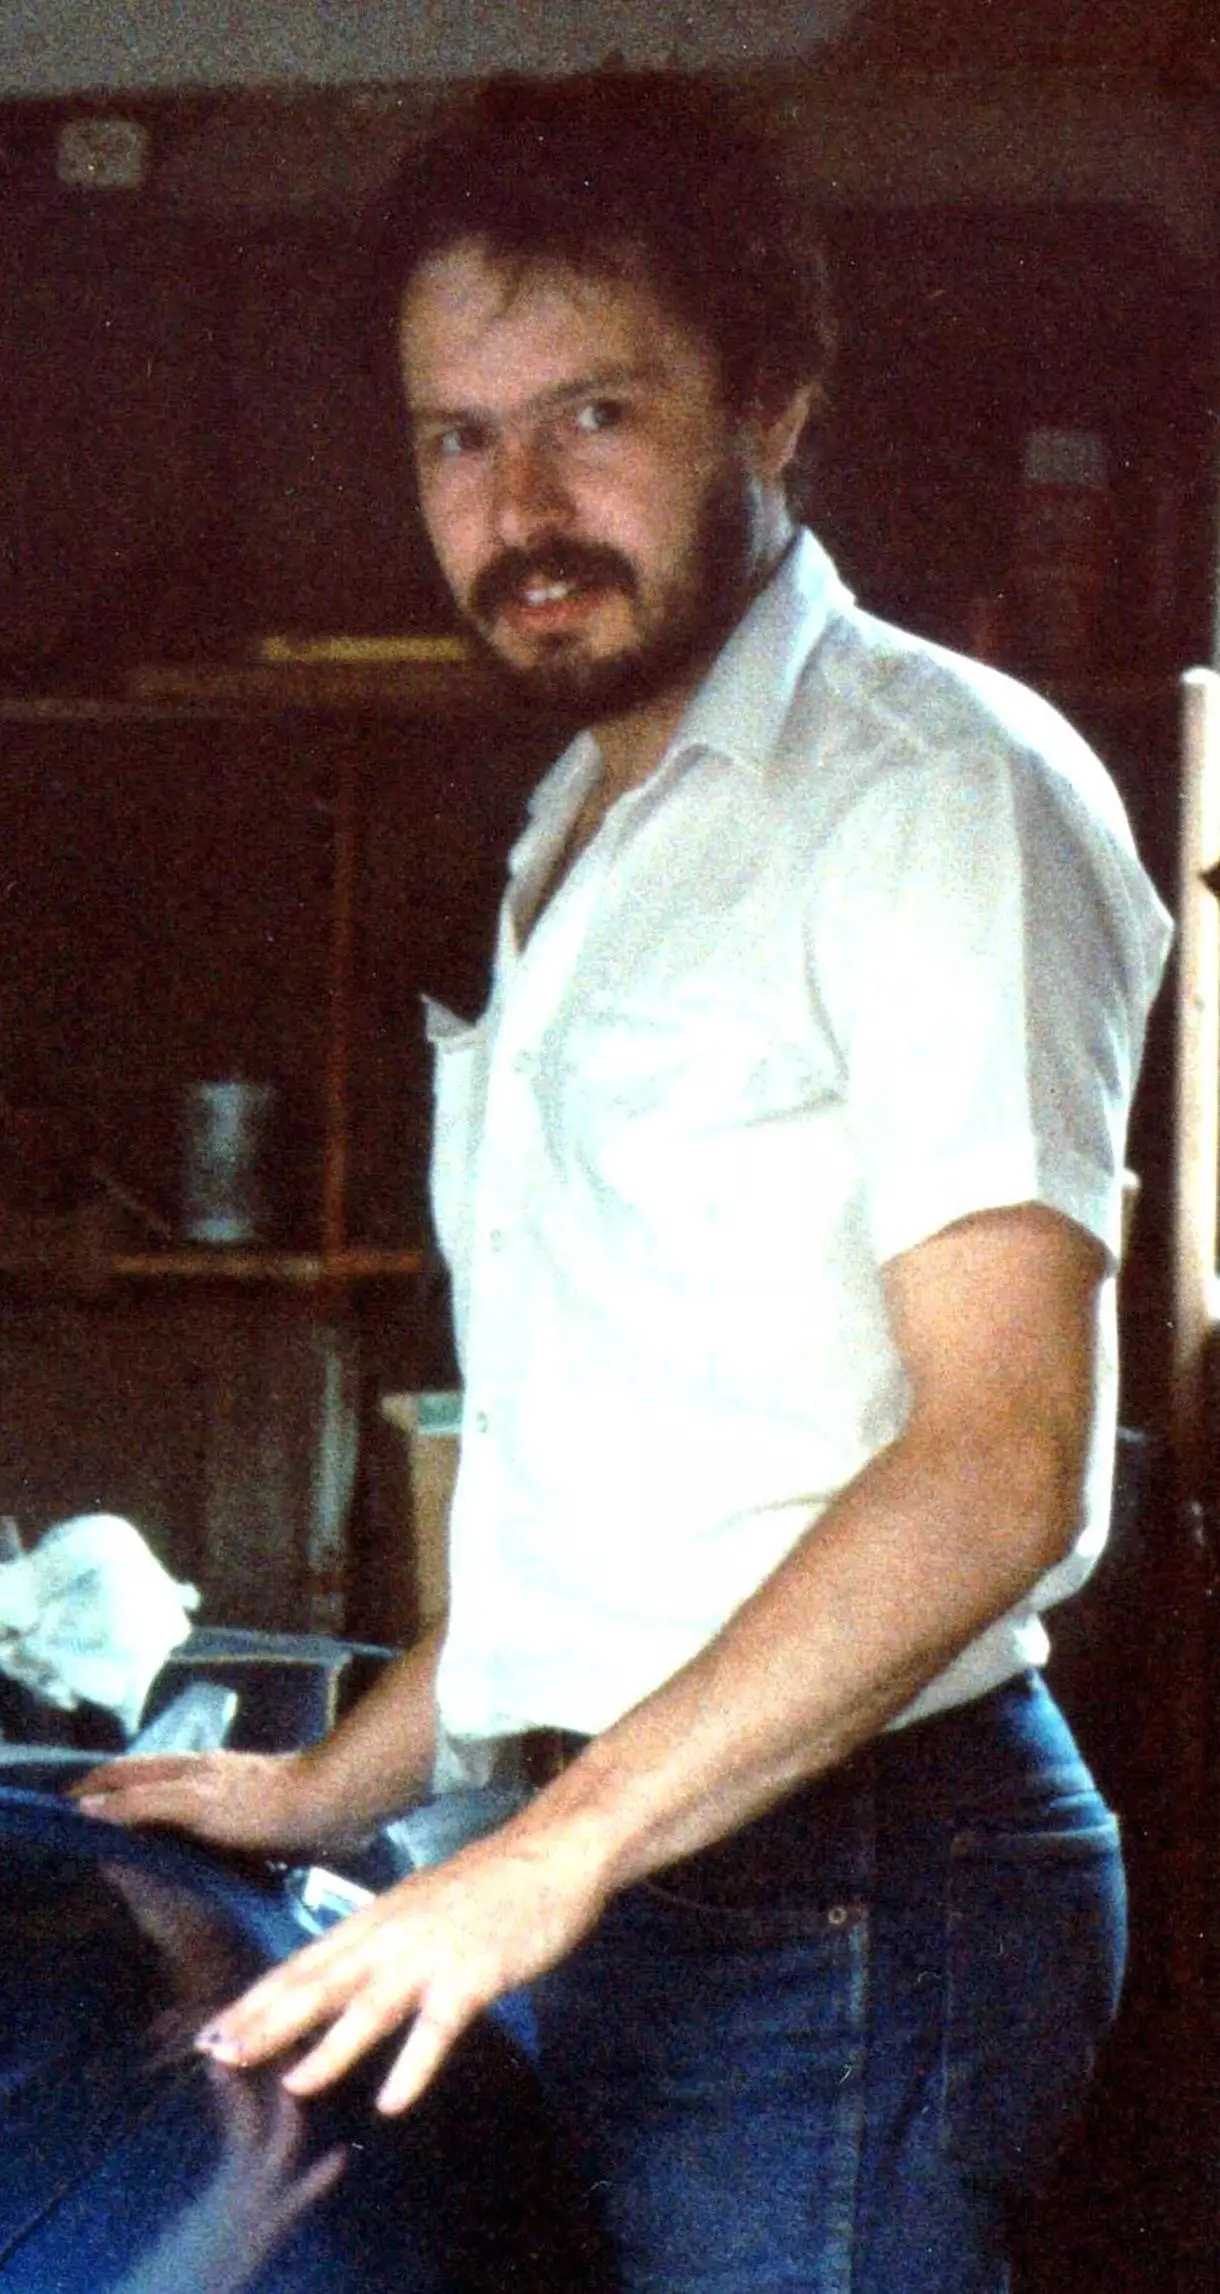 Daniel Morgan was killed in an unsolved axe murder in a South London car park, 1987 (